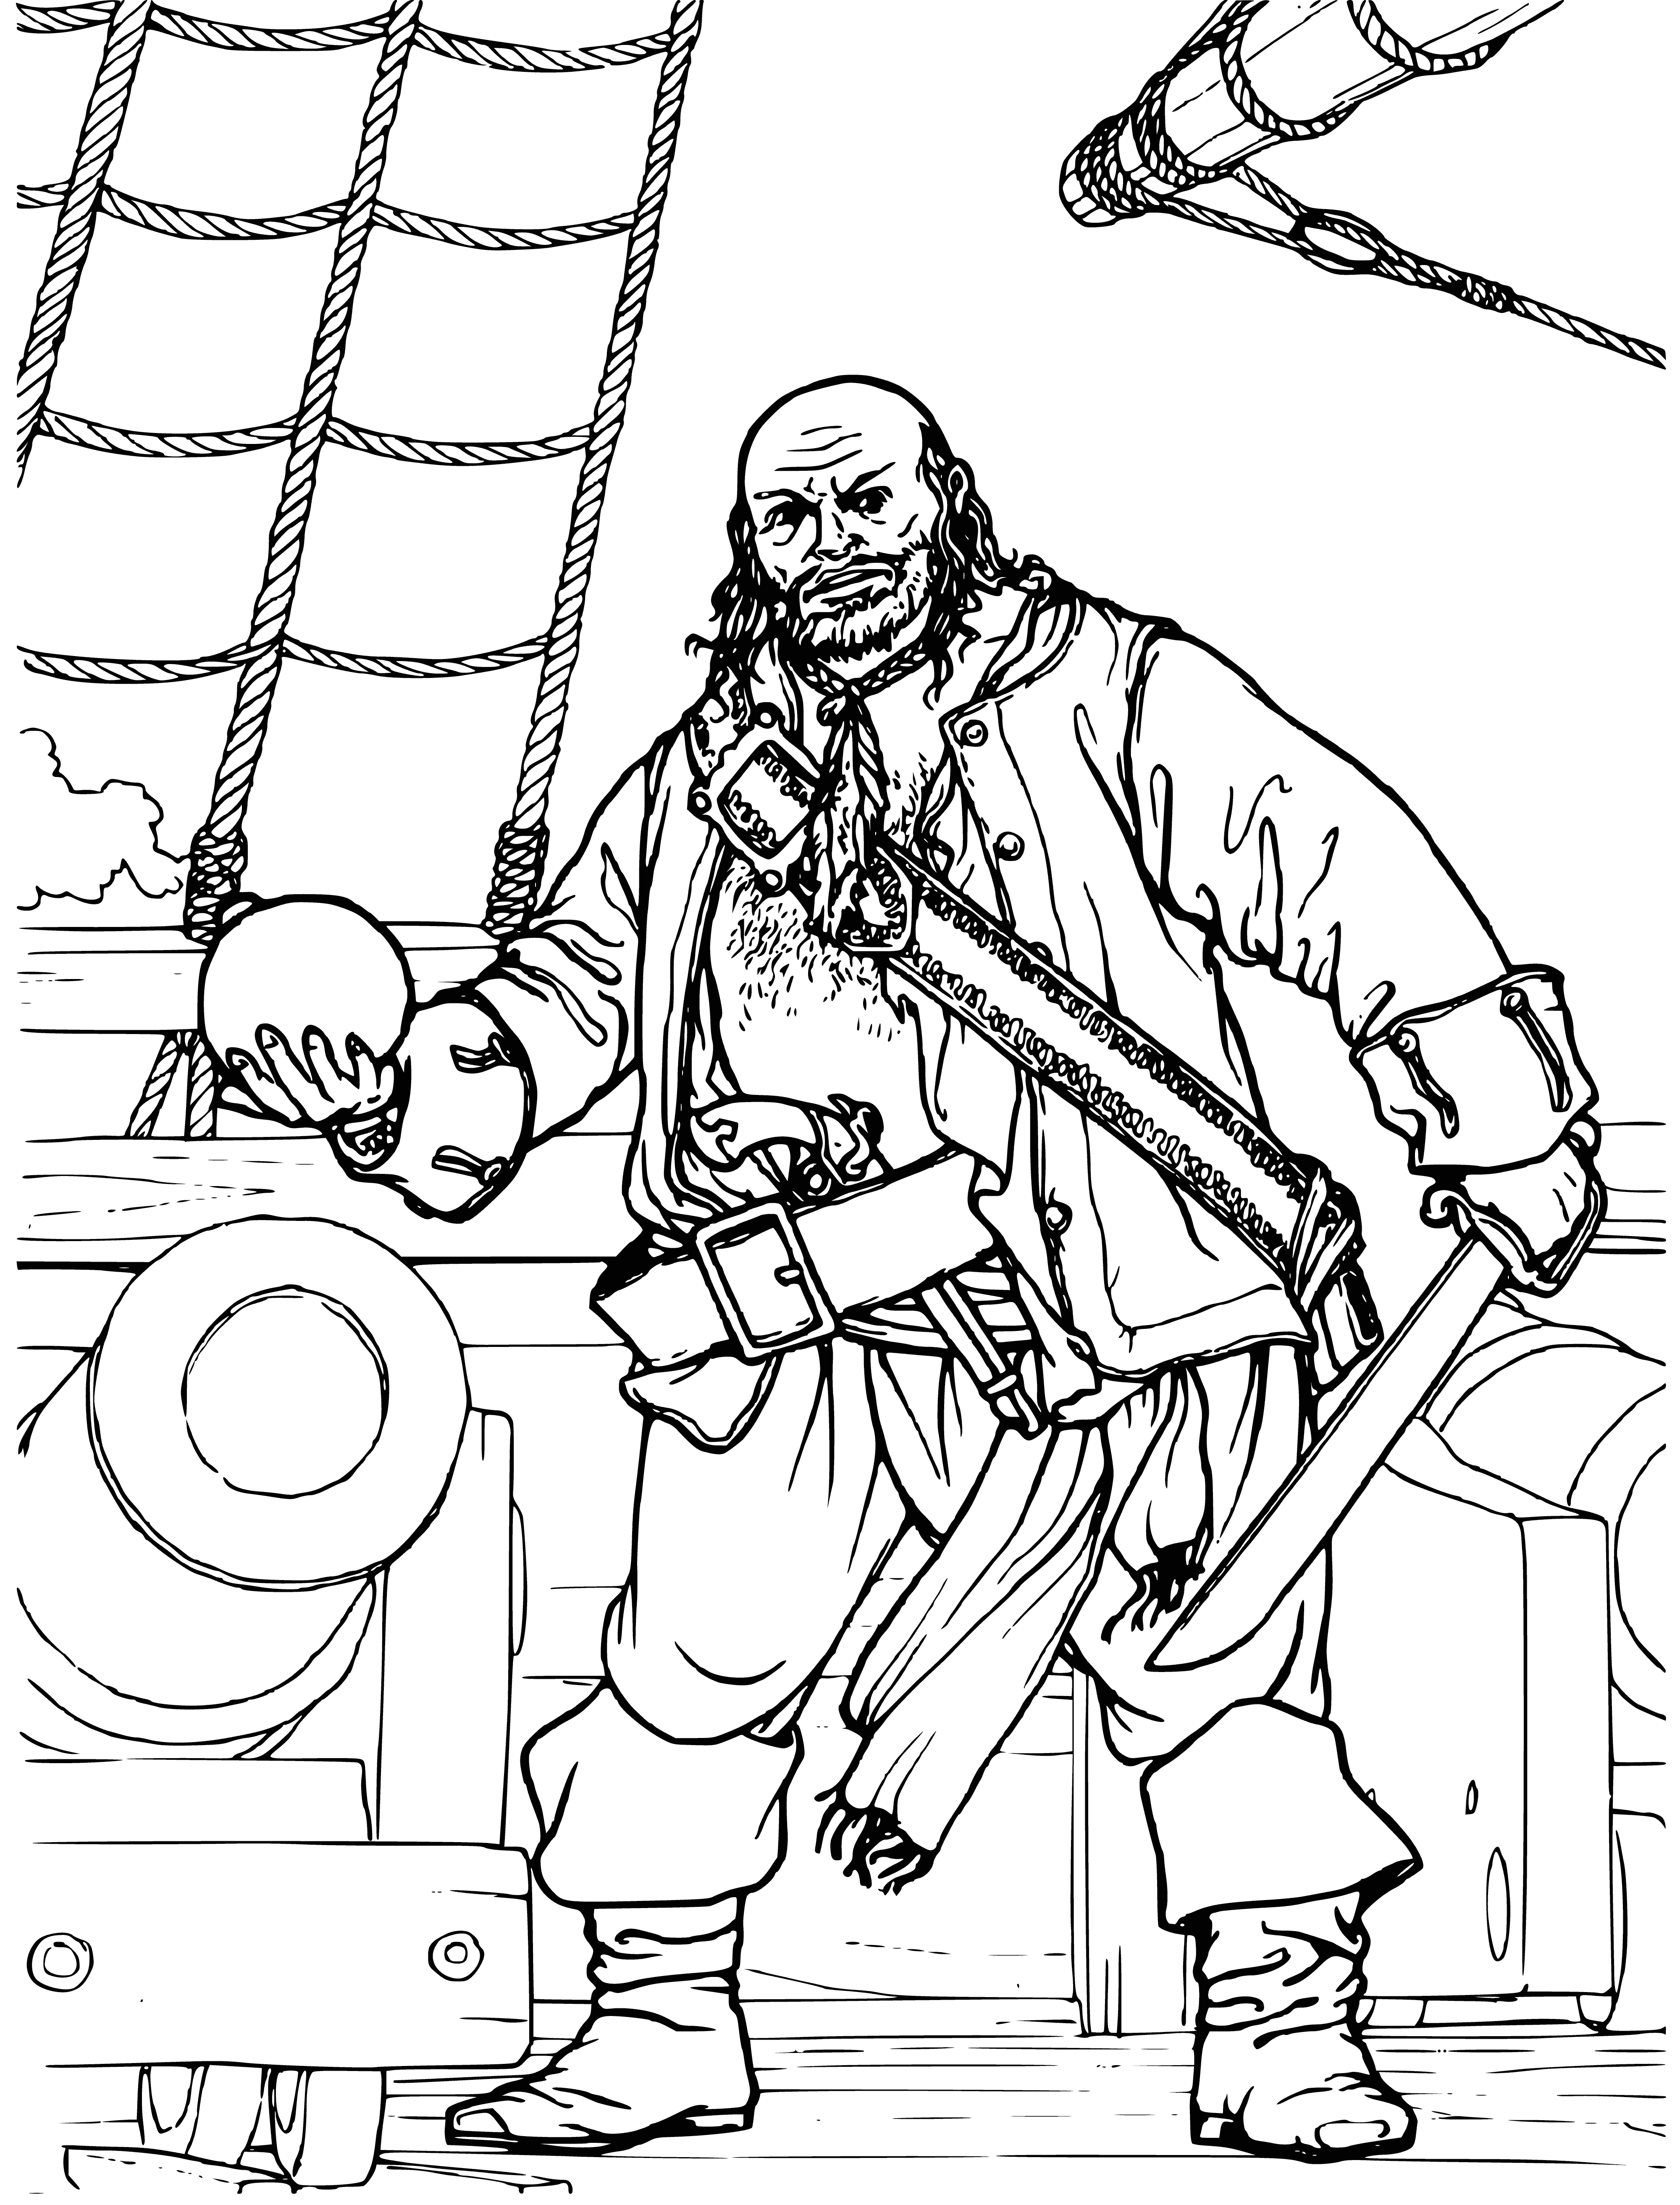 coloring page: 2 rifles, skull w/crossbones, pipe, saber, pistol & hat amidst ammo.